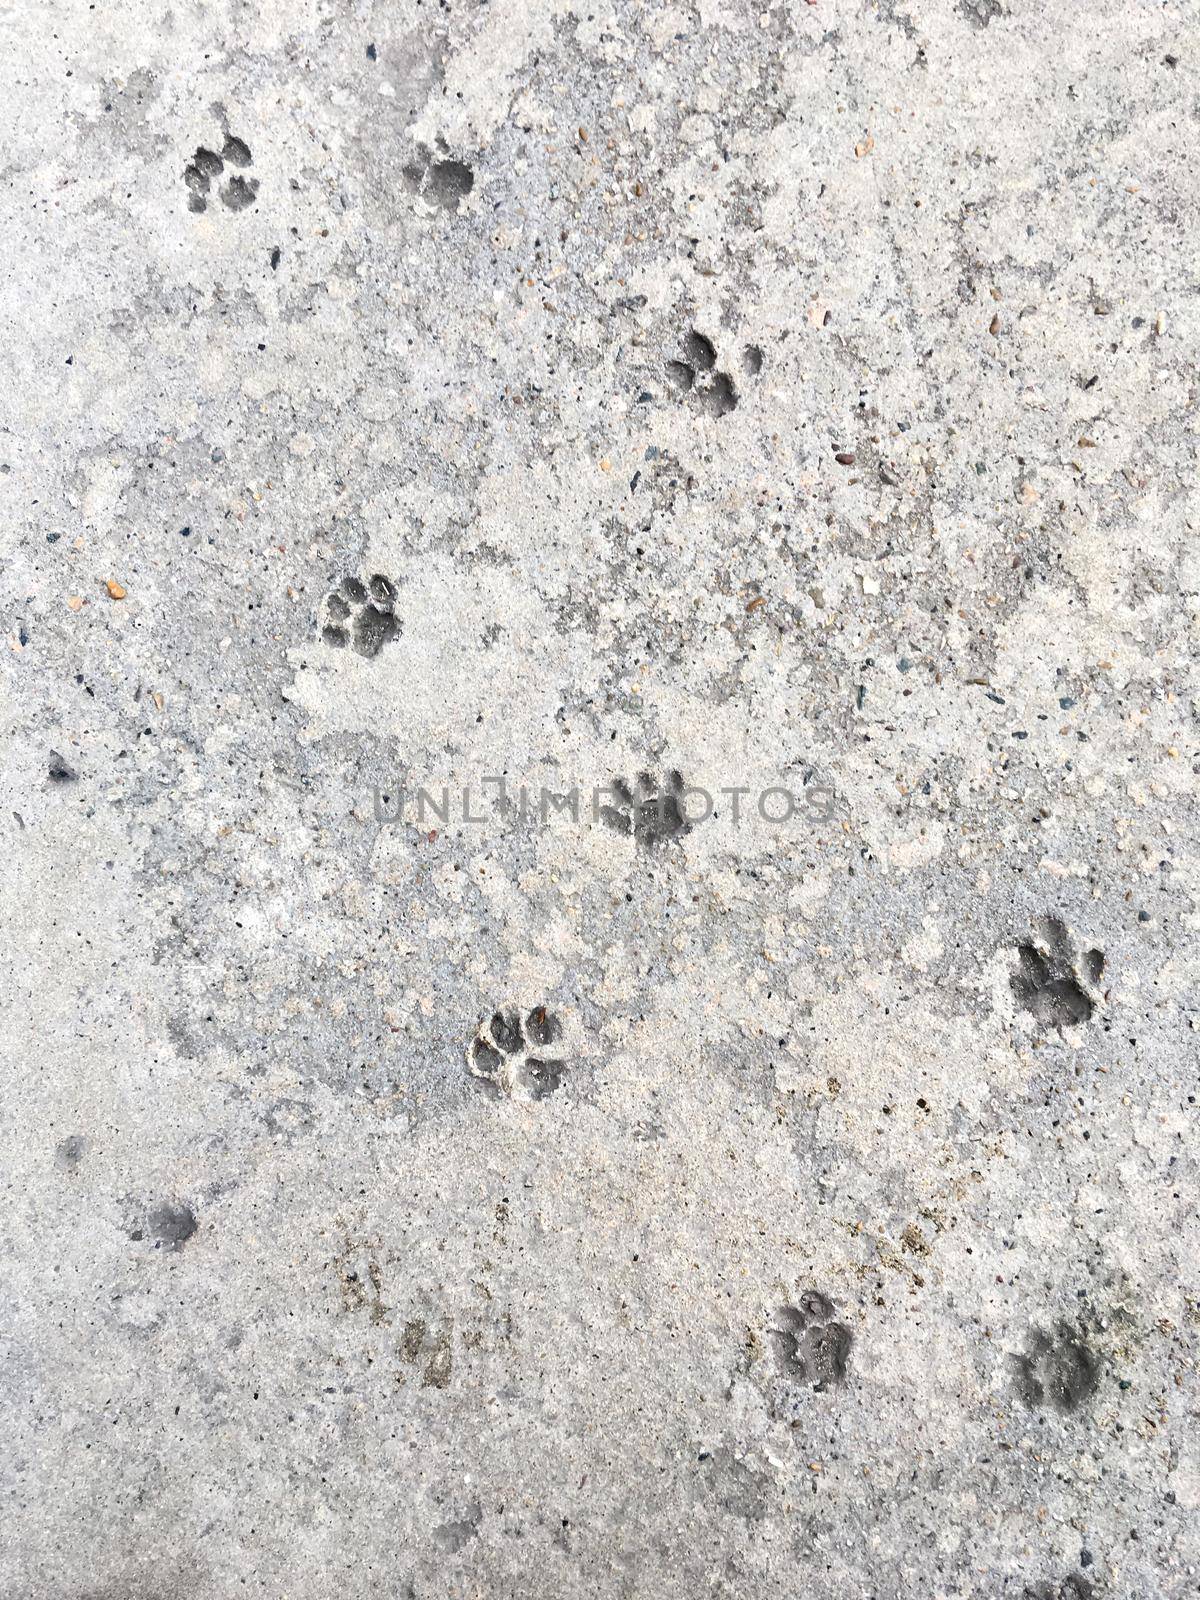 Cat's steps in grey concrete. Relief animal footmarks in beton pavement.